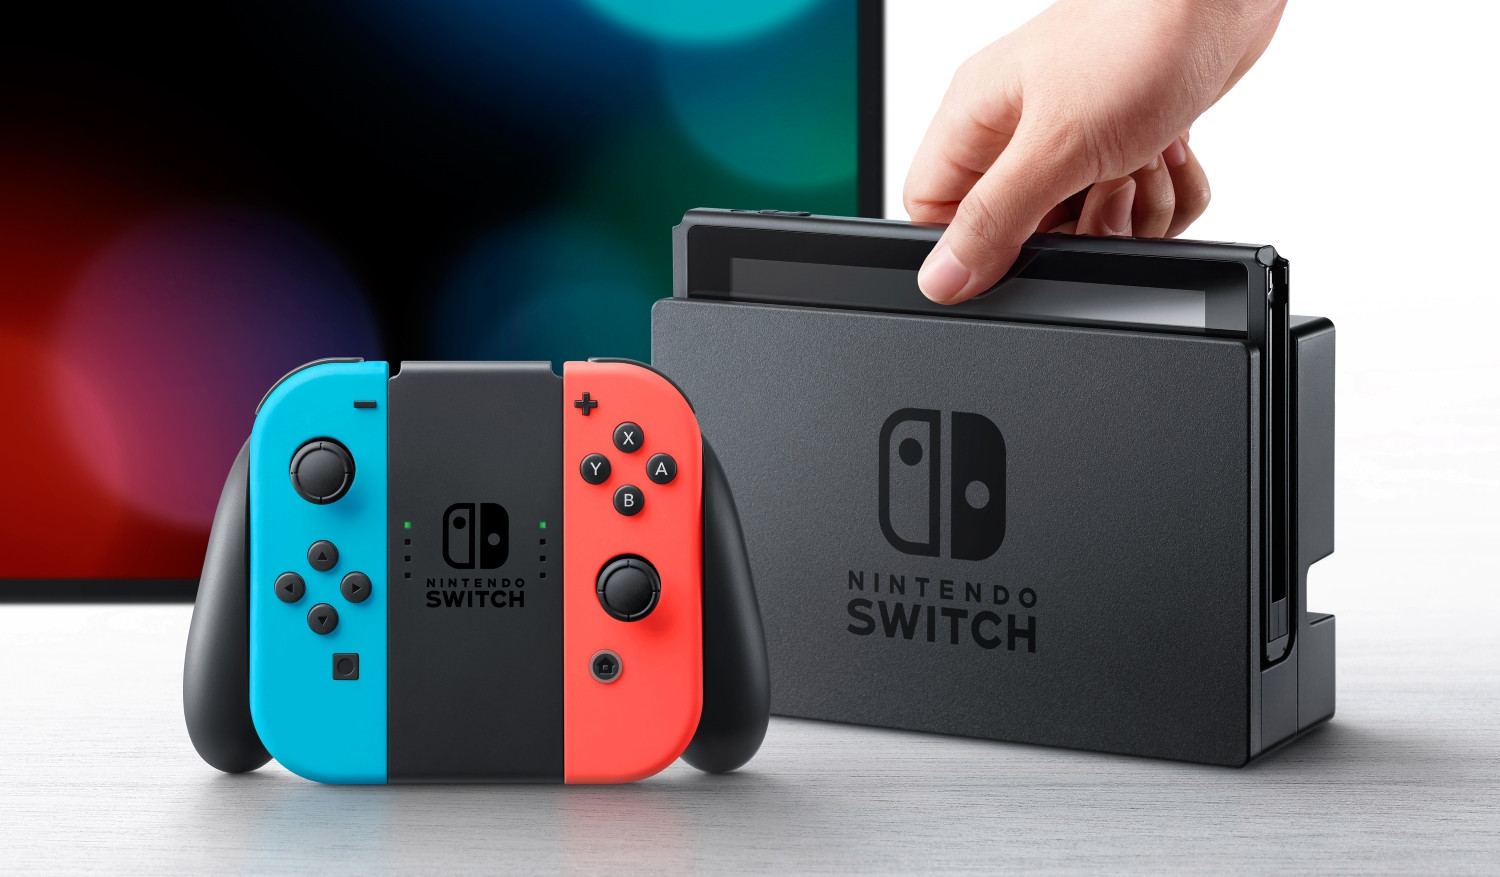 Nintendo Switch Launches in Brazil, the First Nintendo Product to Go on  Sale in the Country Since 2015